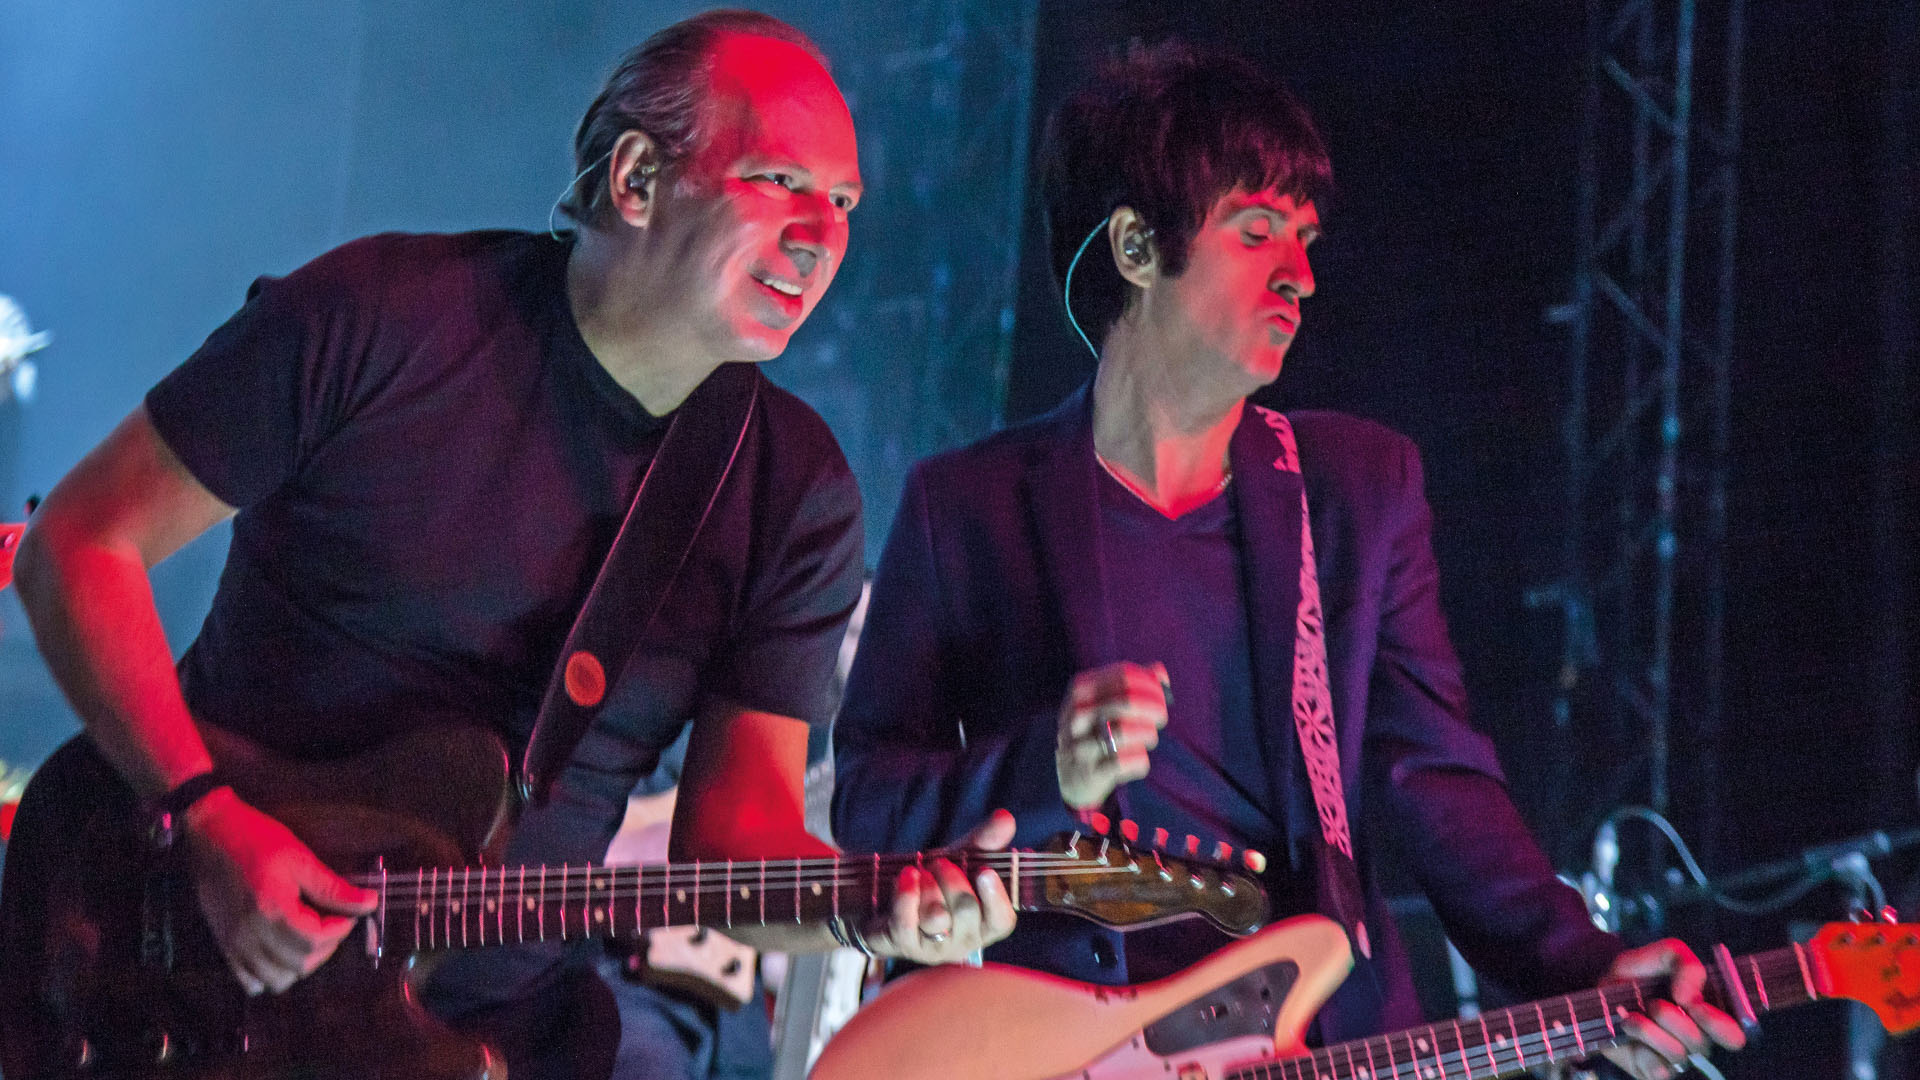 Hans Zimmer and Johnny Marr